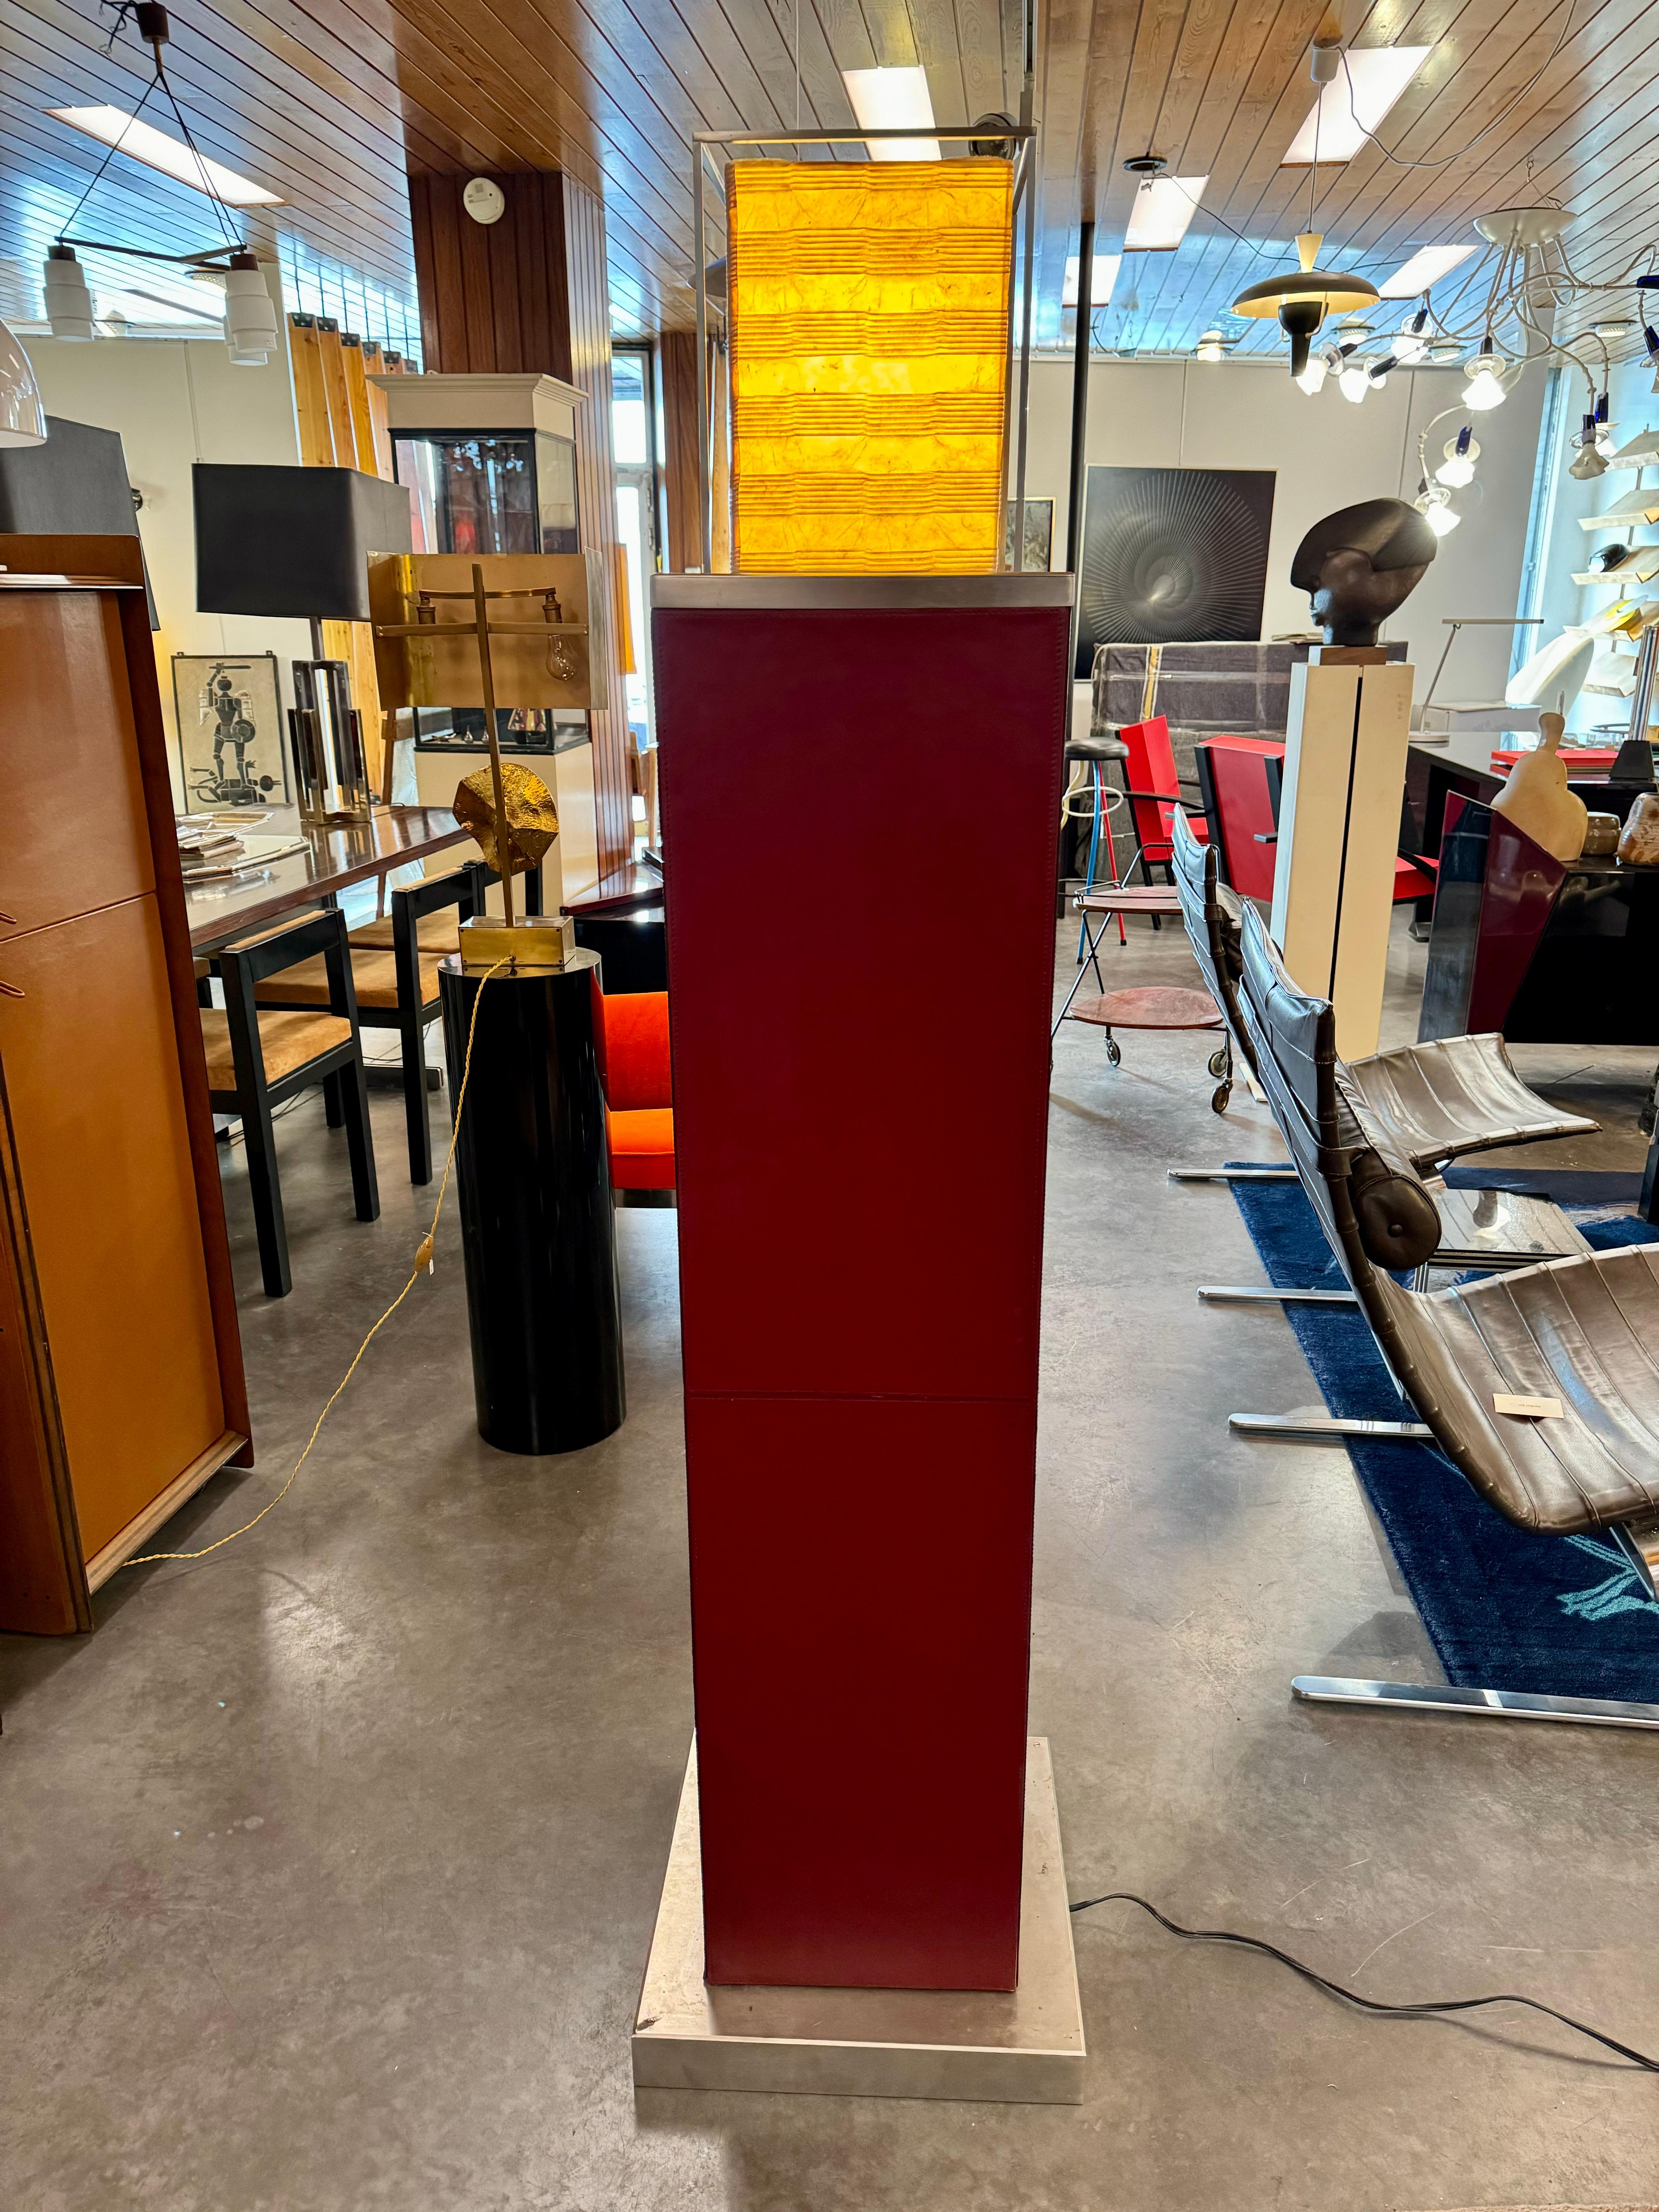 Limited edition on 20 of a floor lamps by Jean-Béranger de Nattes french decorator who only produced small series or unique pieces for his clients.
This particular floor lamp is made of finest red leather on the body of the lamp .
The base is made